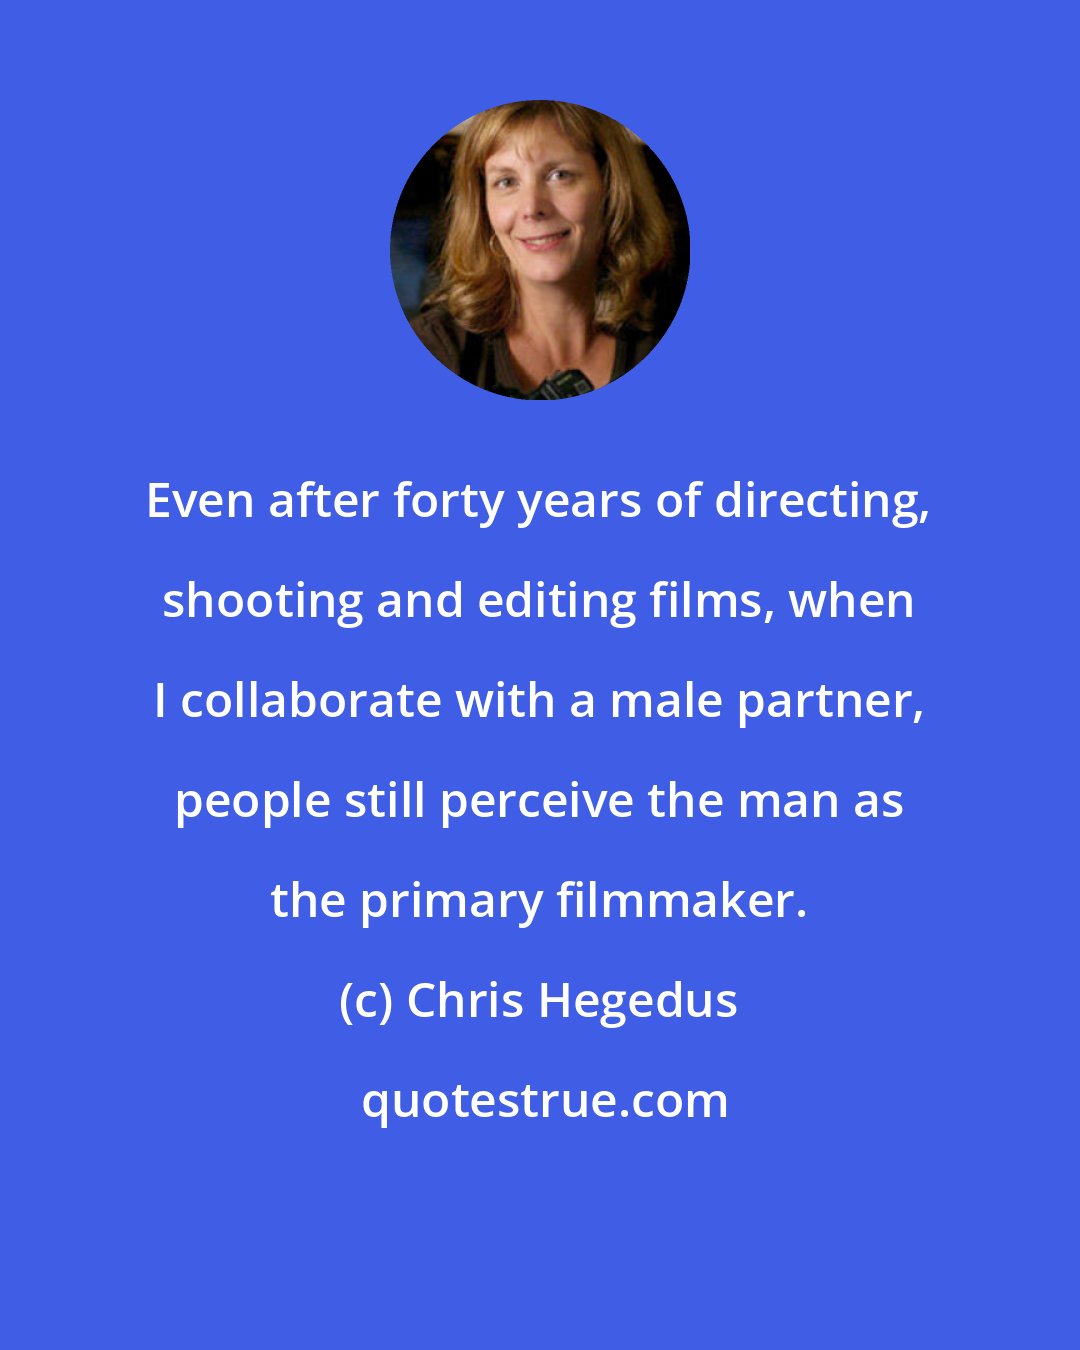 Chris Hegedus: Even after forty years of directing, shooting and editing films, when I collaborate with a male partner, people still perceive the man as the primary filmmaker.